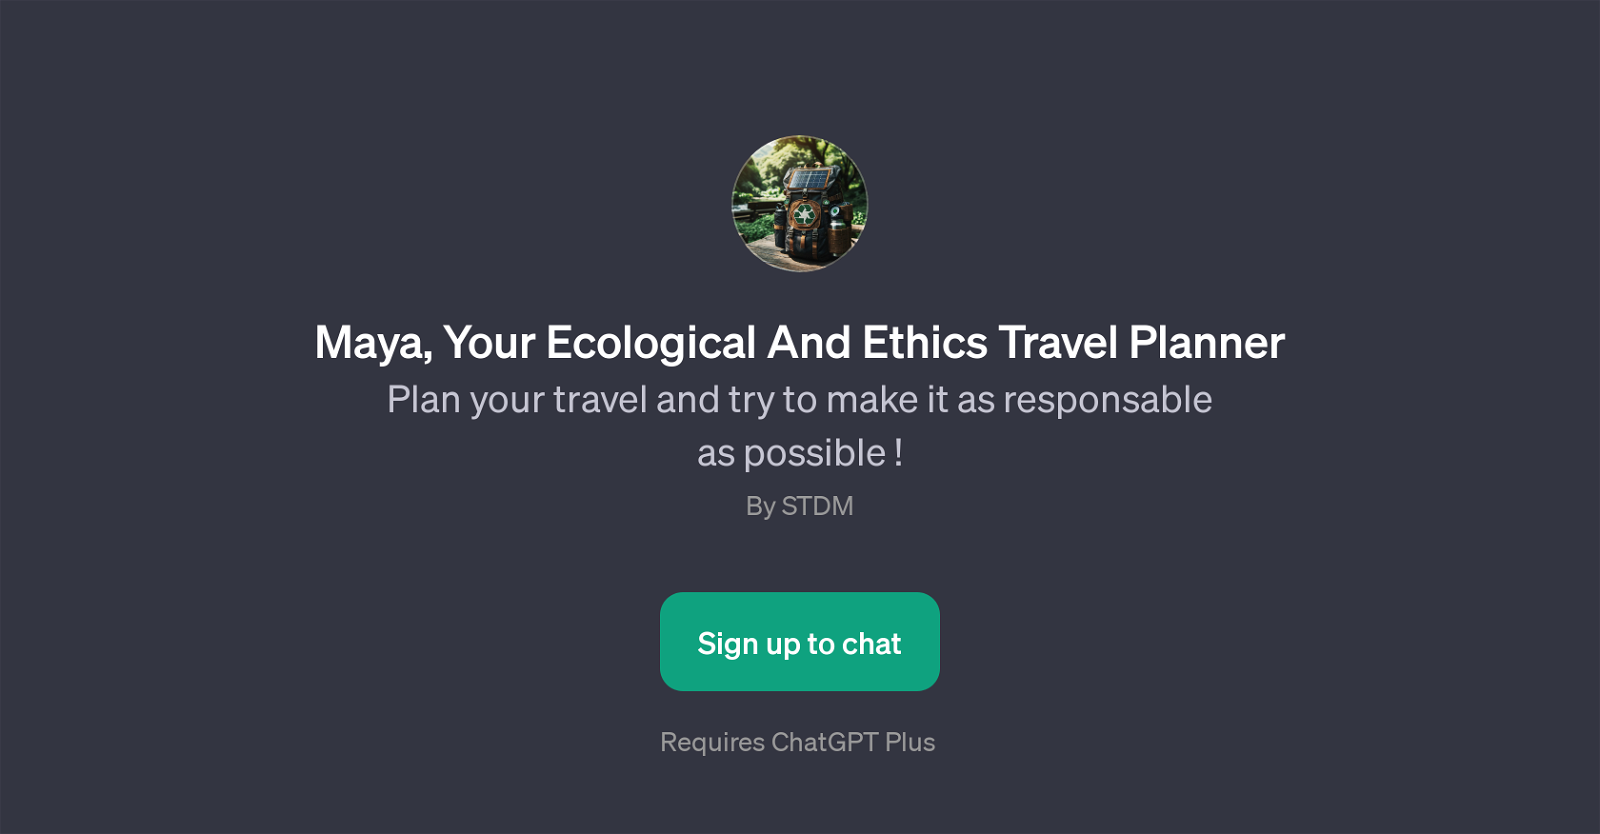 Maya, Your Ecological And Ethics Travel Planner website